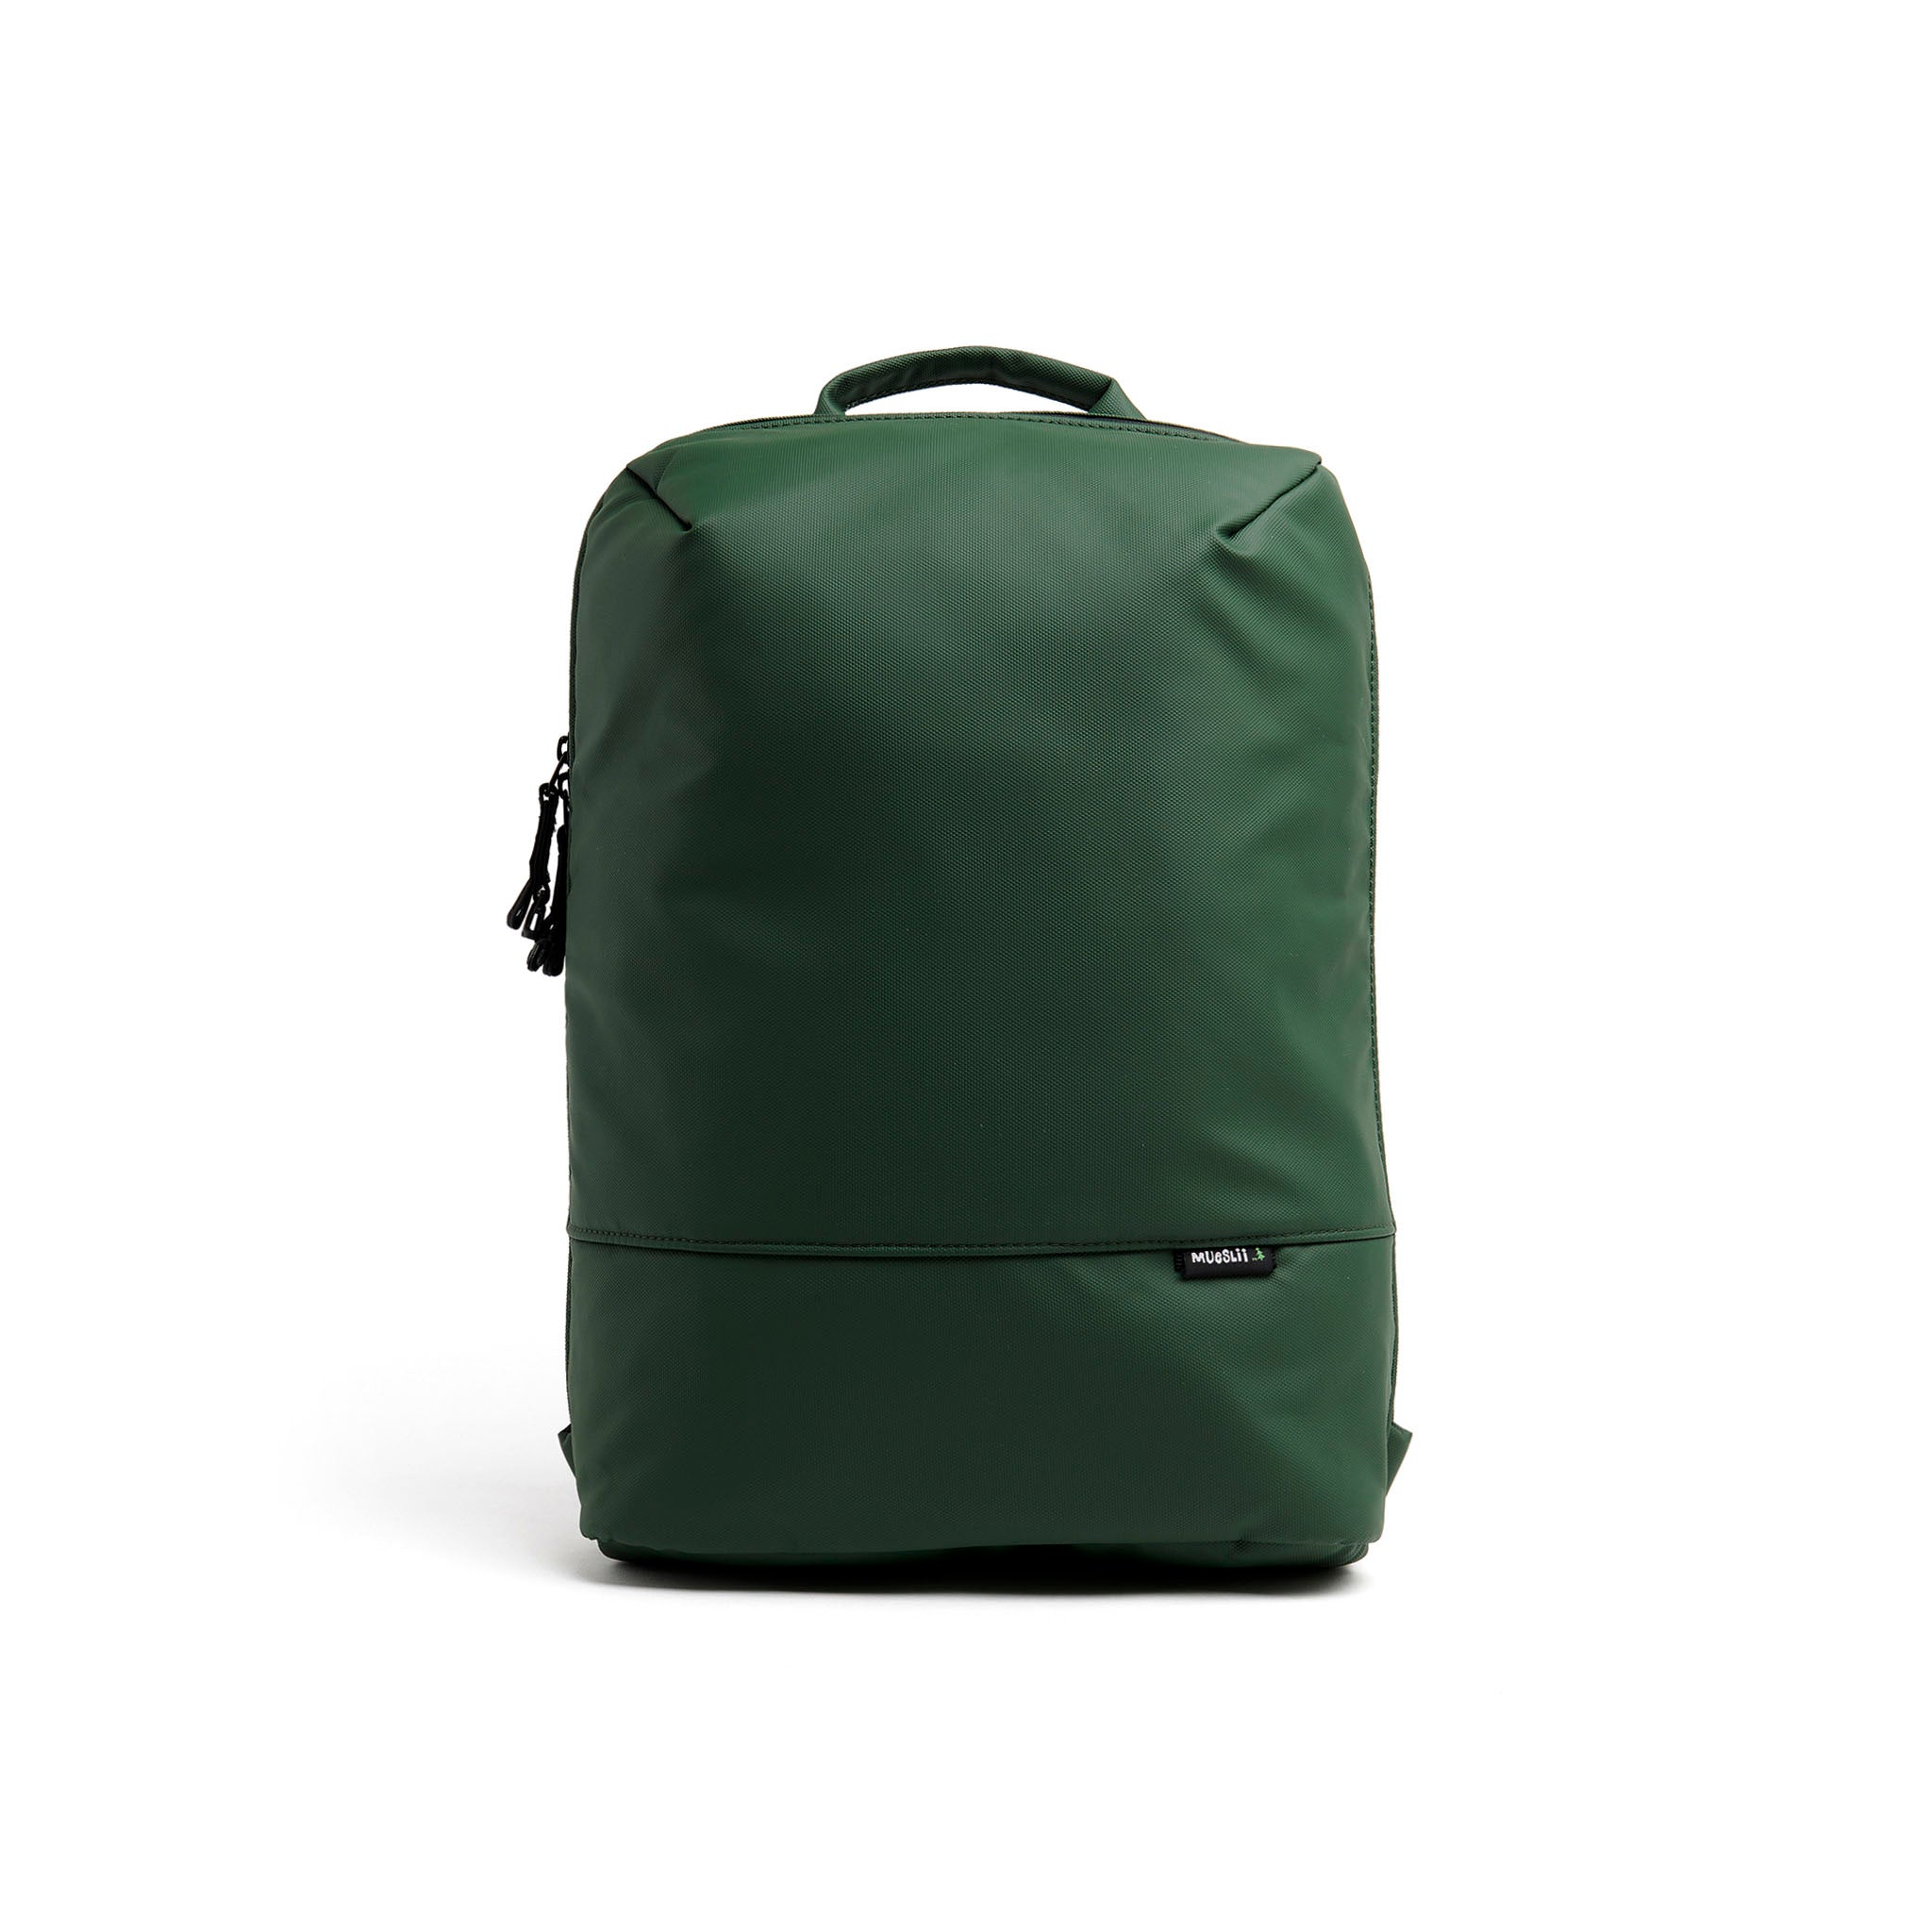 Mueslii daily backpack, made of PU coated waterproof nylon, with a laptop compartment, color olive green, front view.